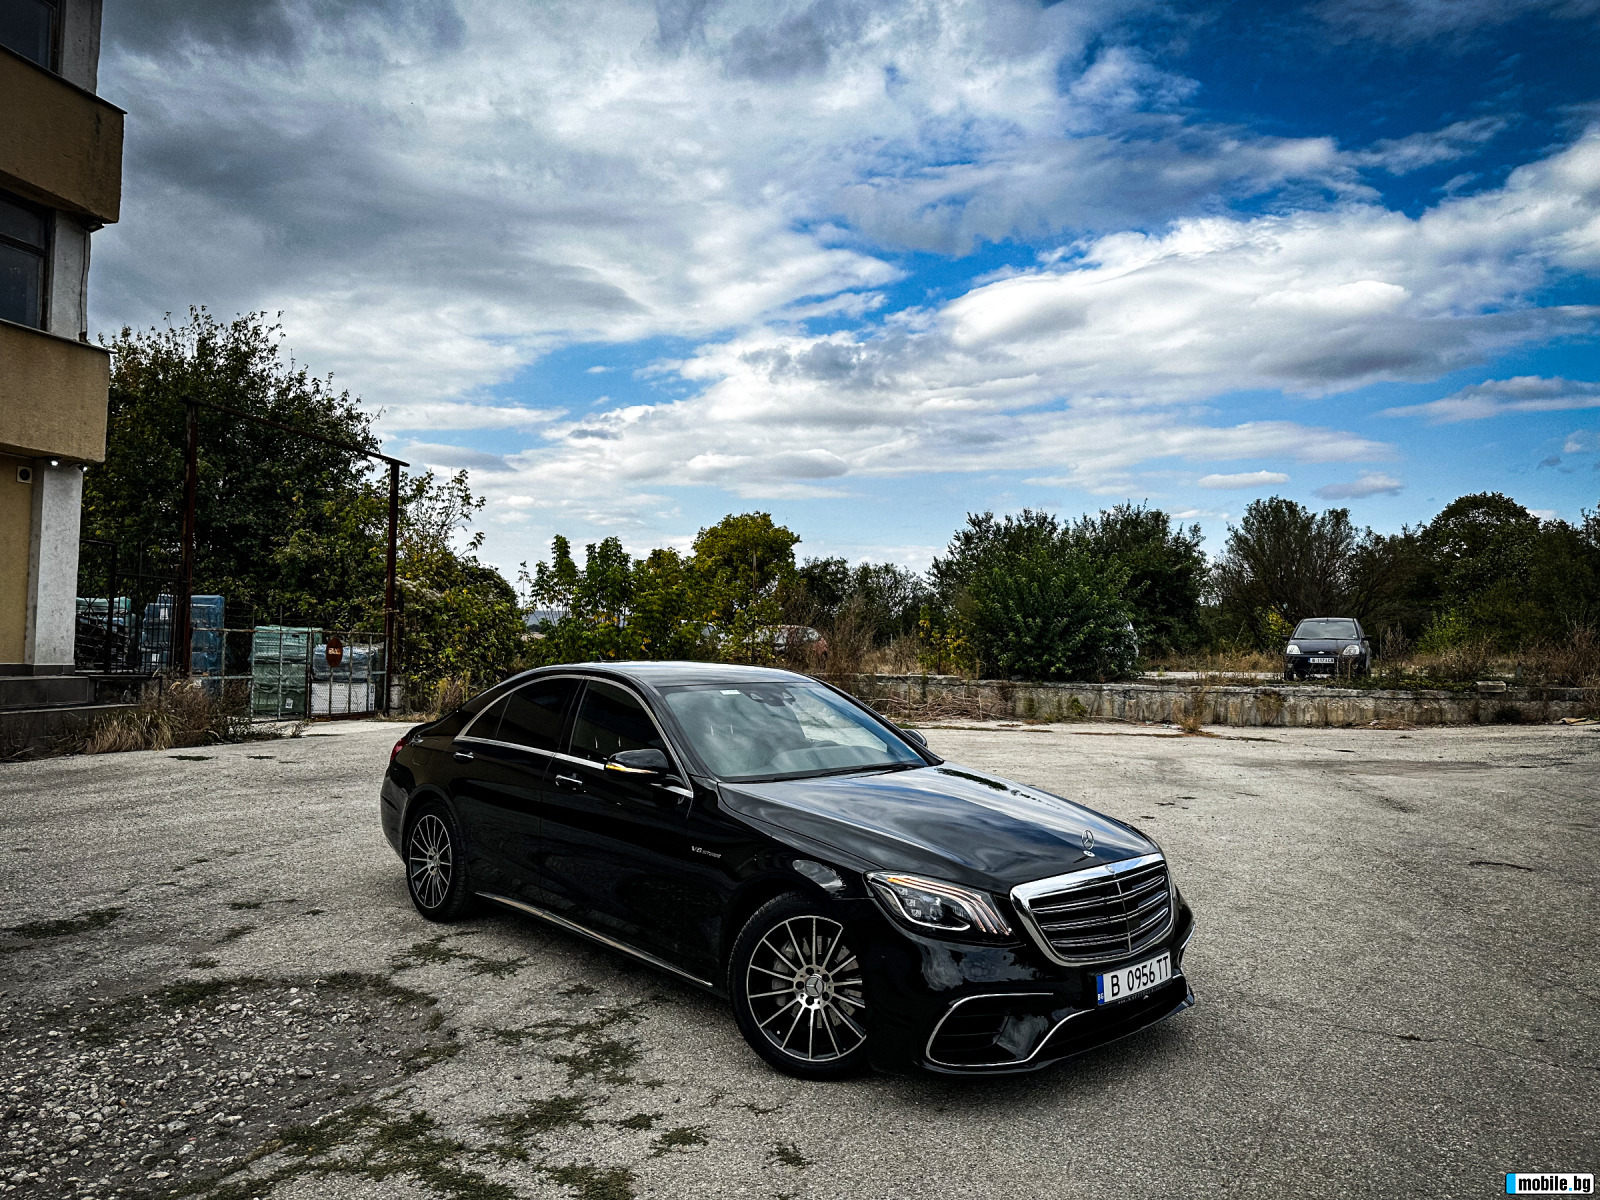 Mercedes-Benz S 350 =S63 AMG PACKAGE=EXCLUSIVE= = | Mobile.bg   5